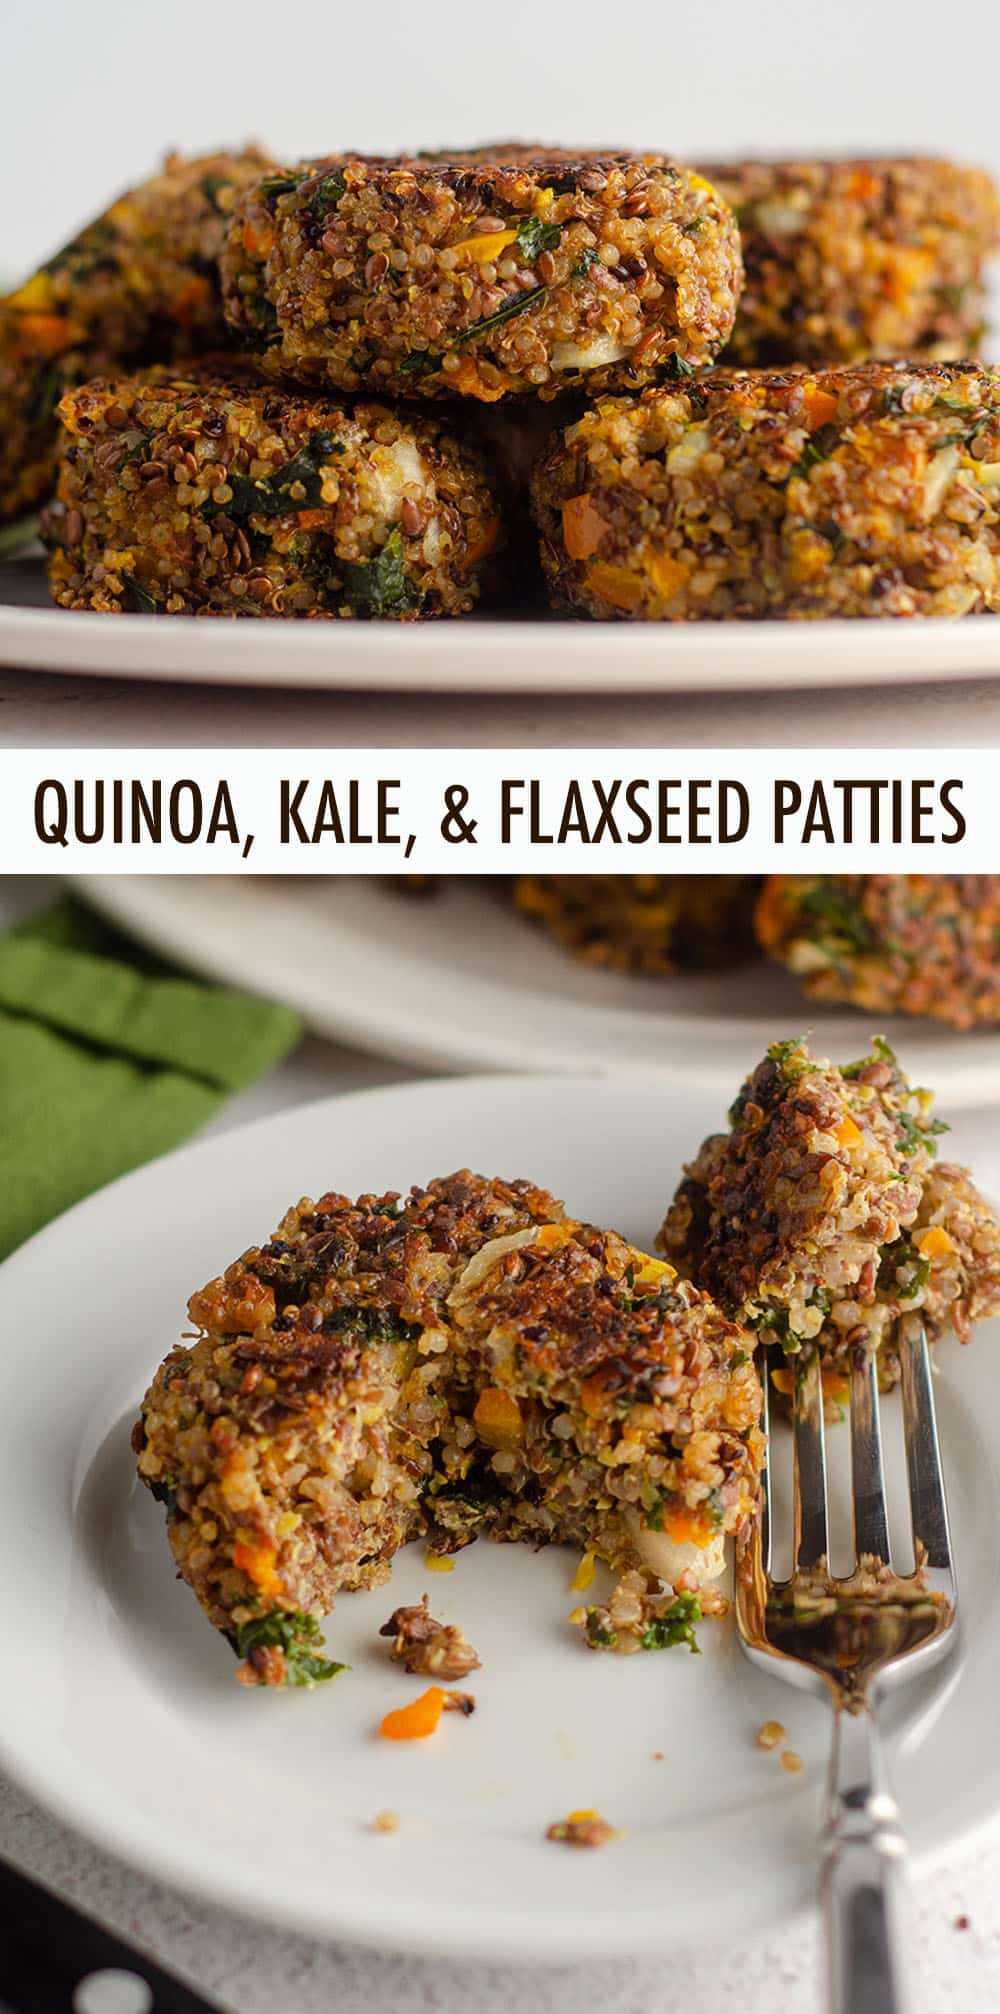 Hearty quinoa patties, jam packed with vegetables and protein. Gluten-free and vegetarian friendly! via @frshaprilflours